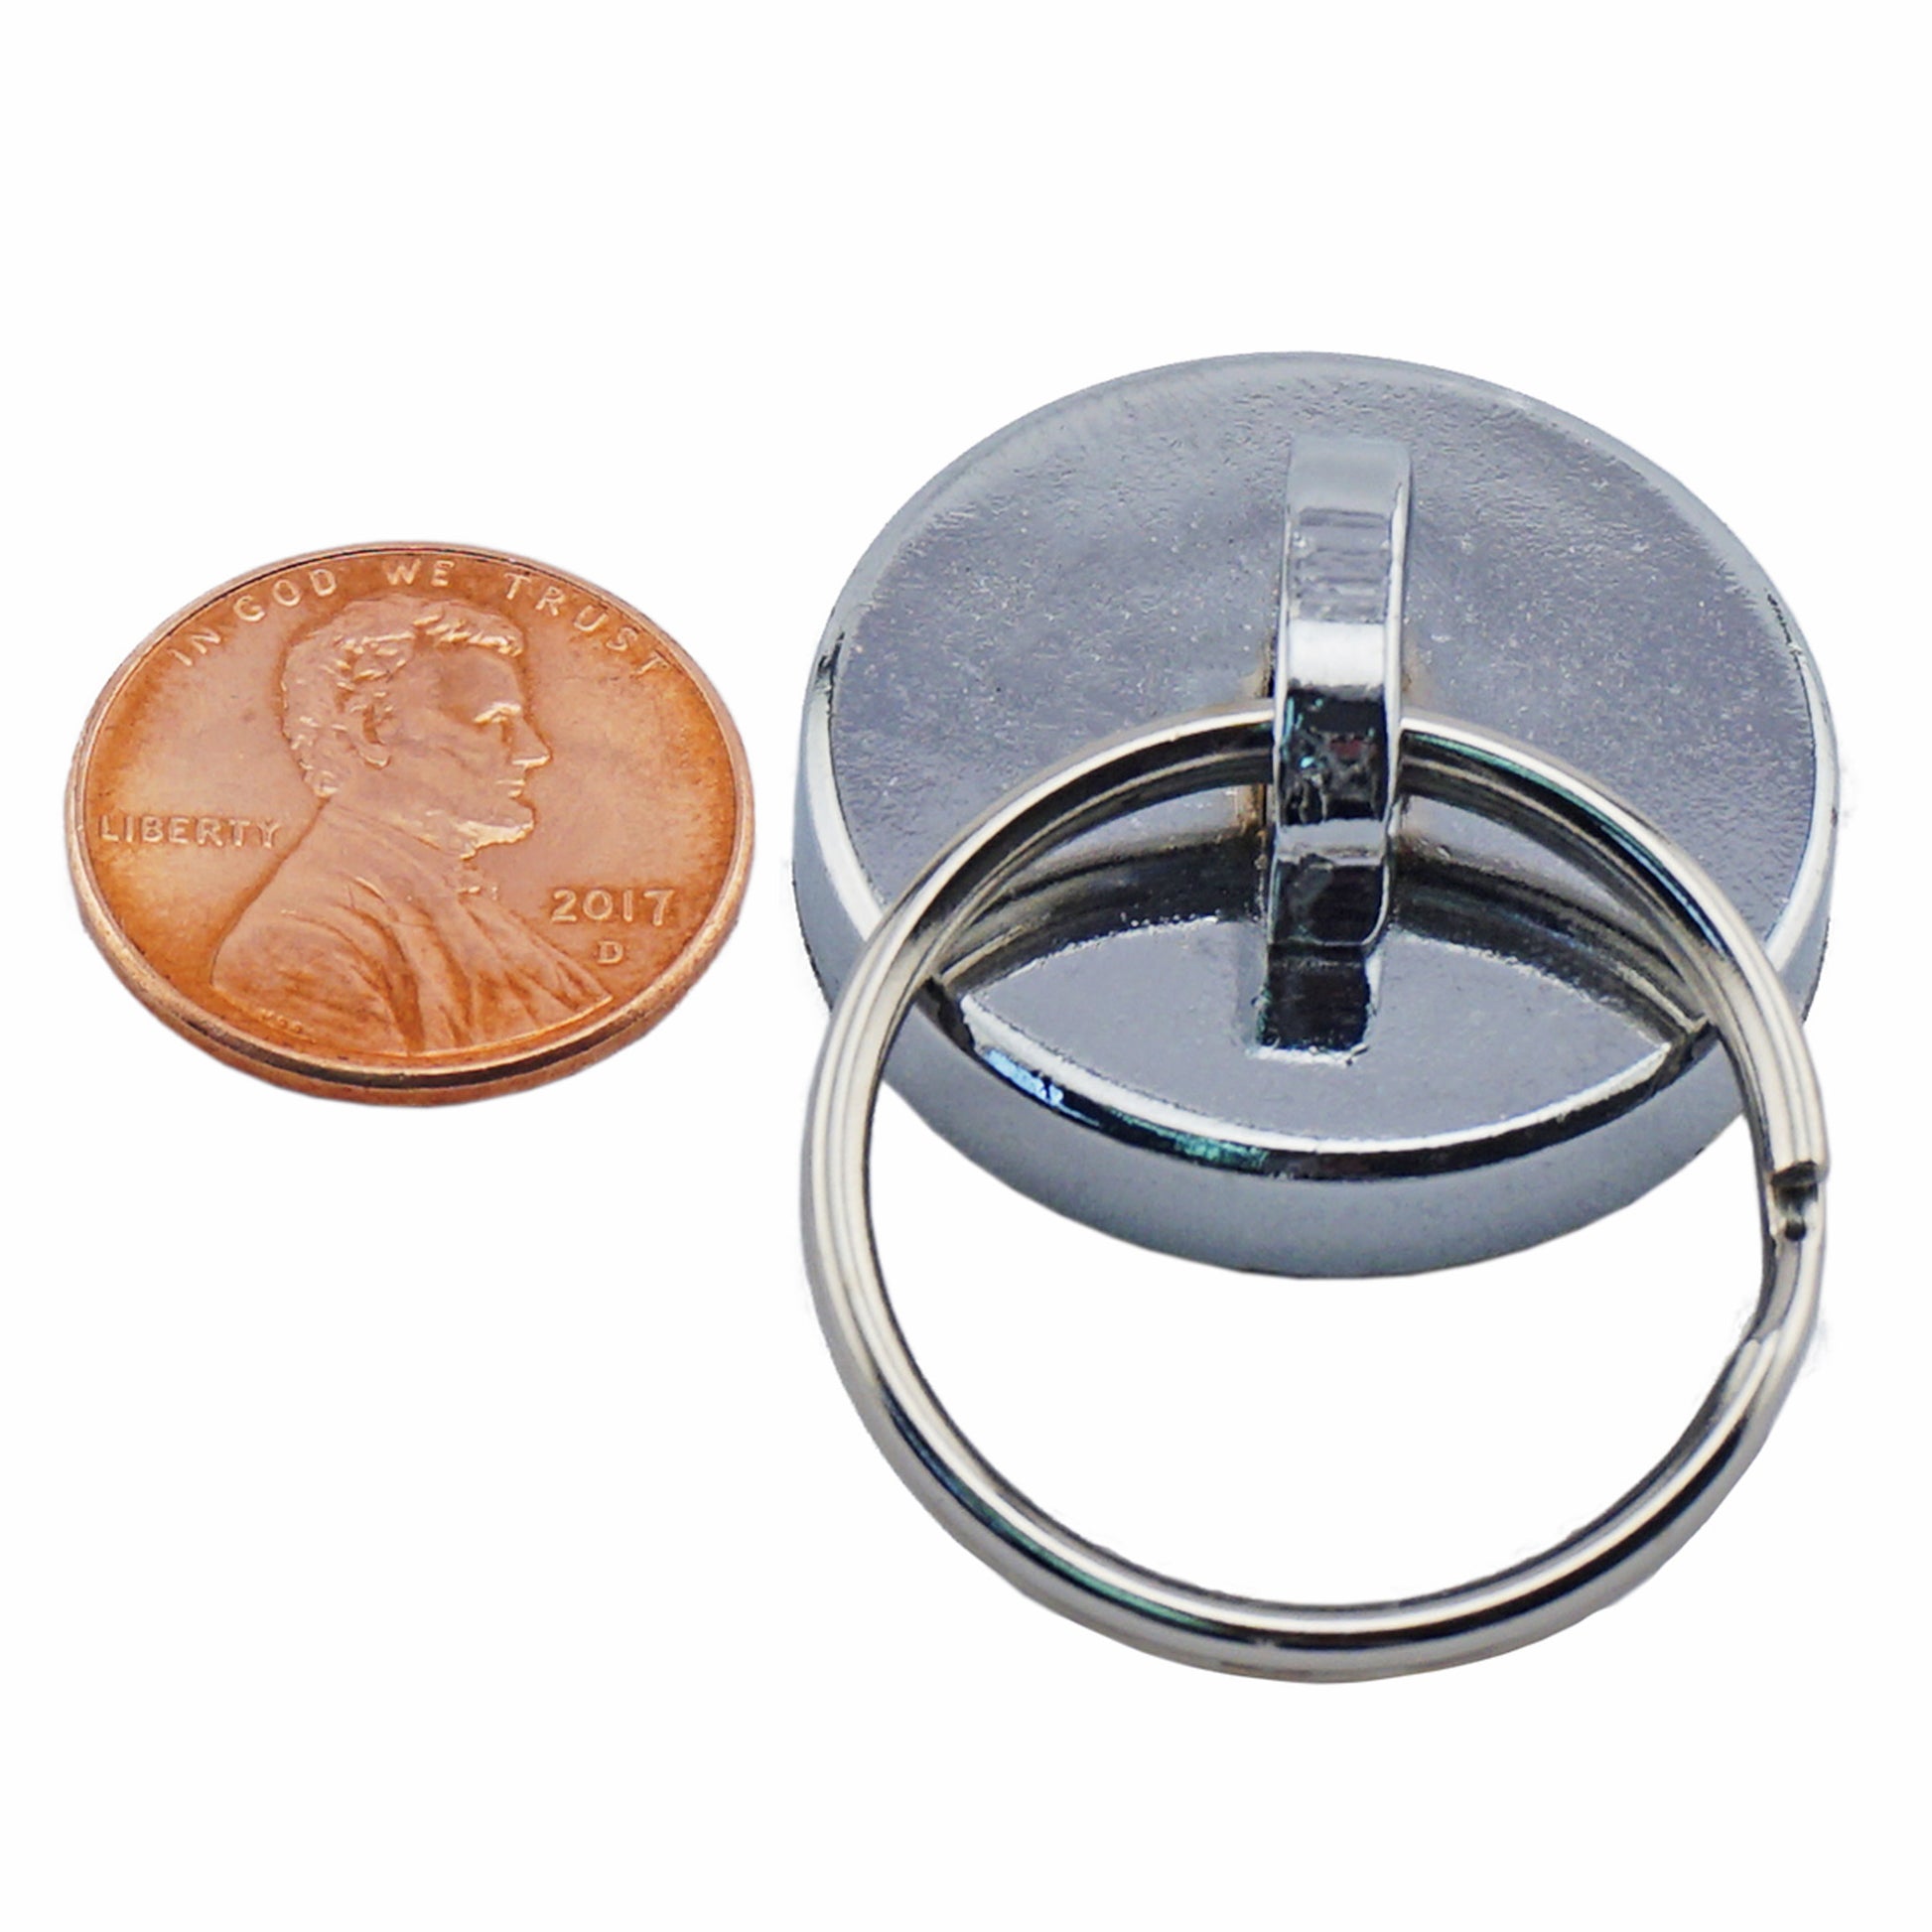 Load image into Gallery viewer, NA011200N Neodymium Magnetic Keyring - Compared to Penny for Size Reference